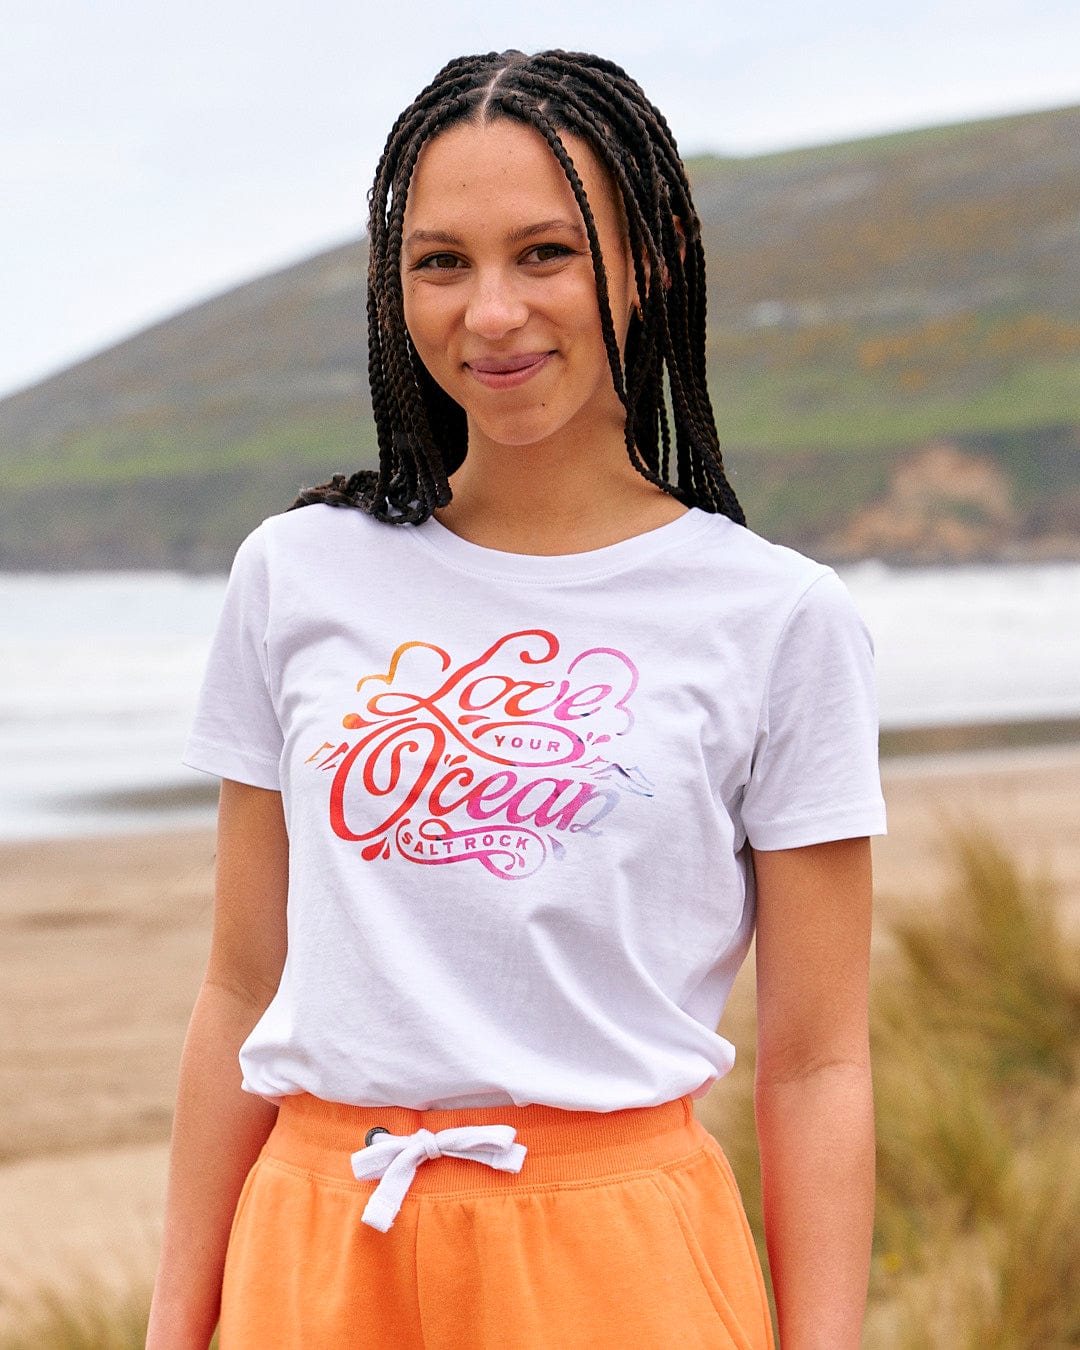 A woman wearing a Saltrock Love Your Ocean - Womens Short Sleeve T-Shirt in White and orange shorts standing on the beach.